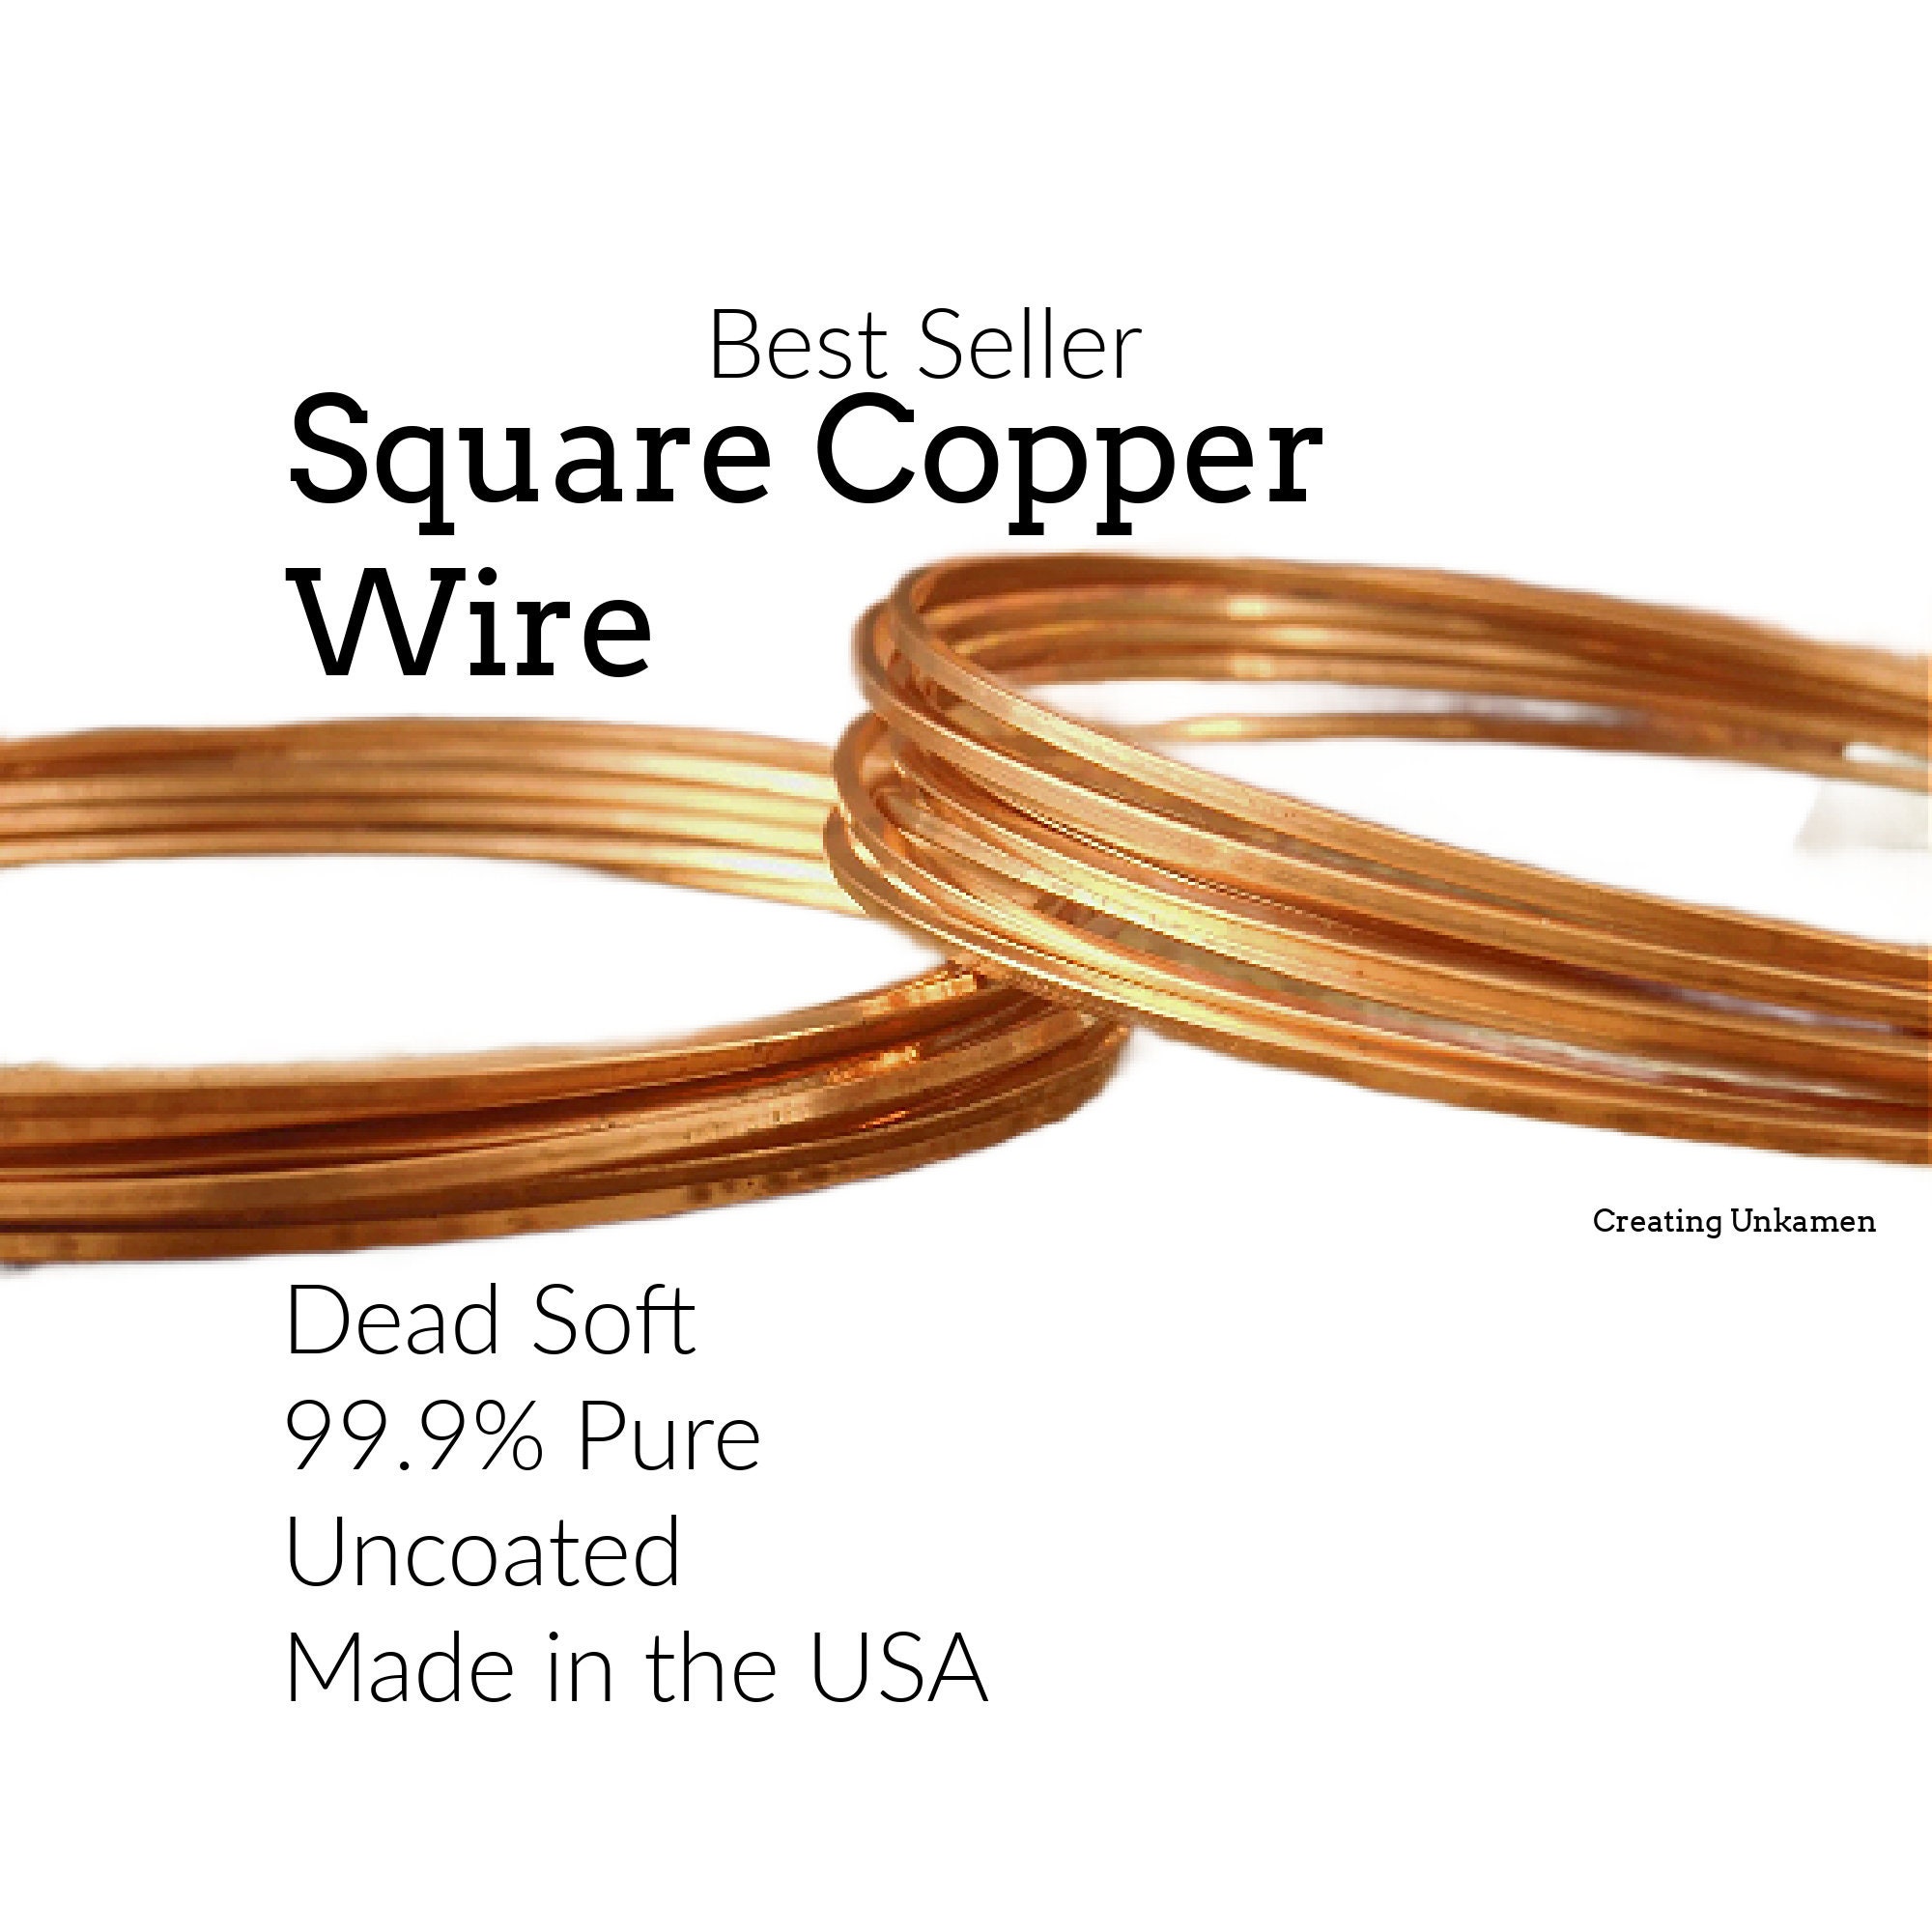 Copper Half Round Dead Soft 20 gauge Wire for Wire Working, Wire Weaving,  Copper Wire Jewelry Making Supplies, Wire Supplies for Crafting